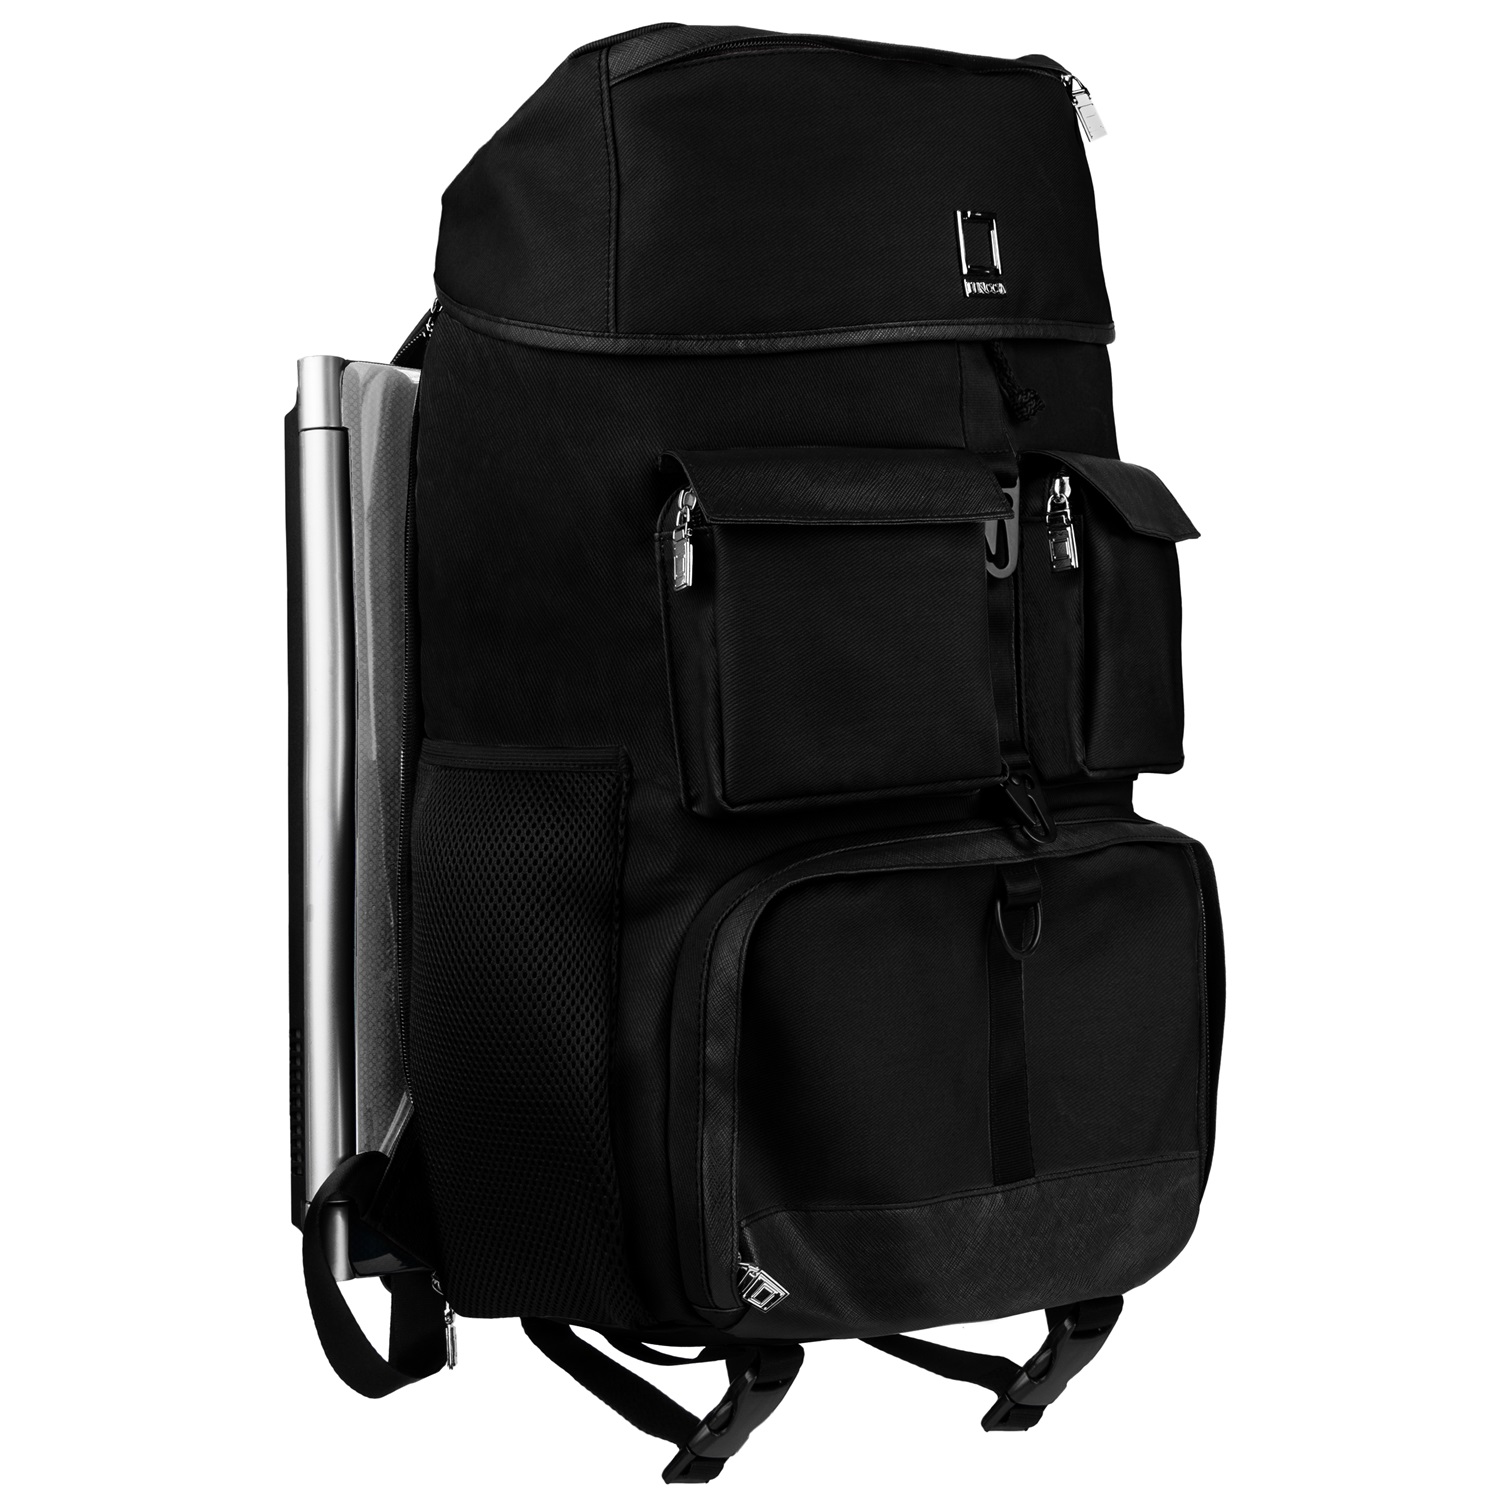 Lencca Logan Mens or Womens Professional Twill Travel Backpack for both Laptop and Camera Devices fits Acer Laptops (All Sizes)